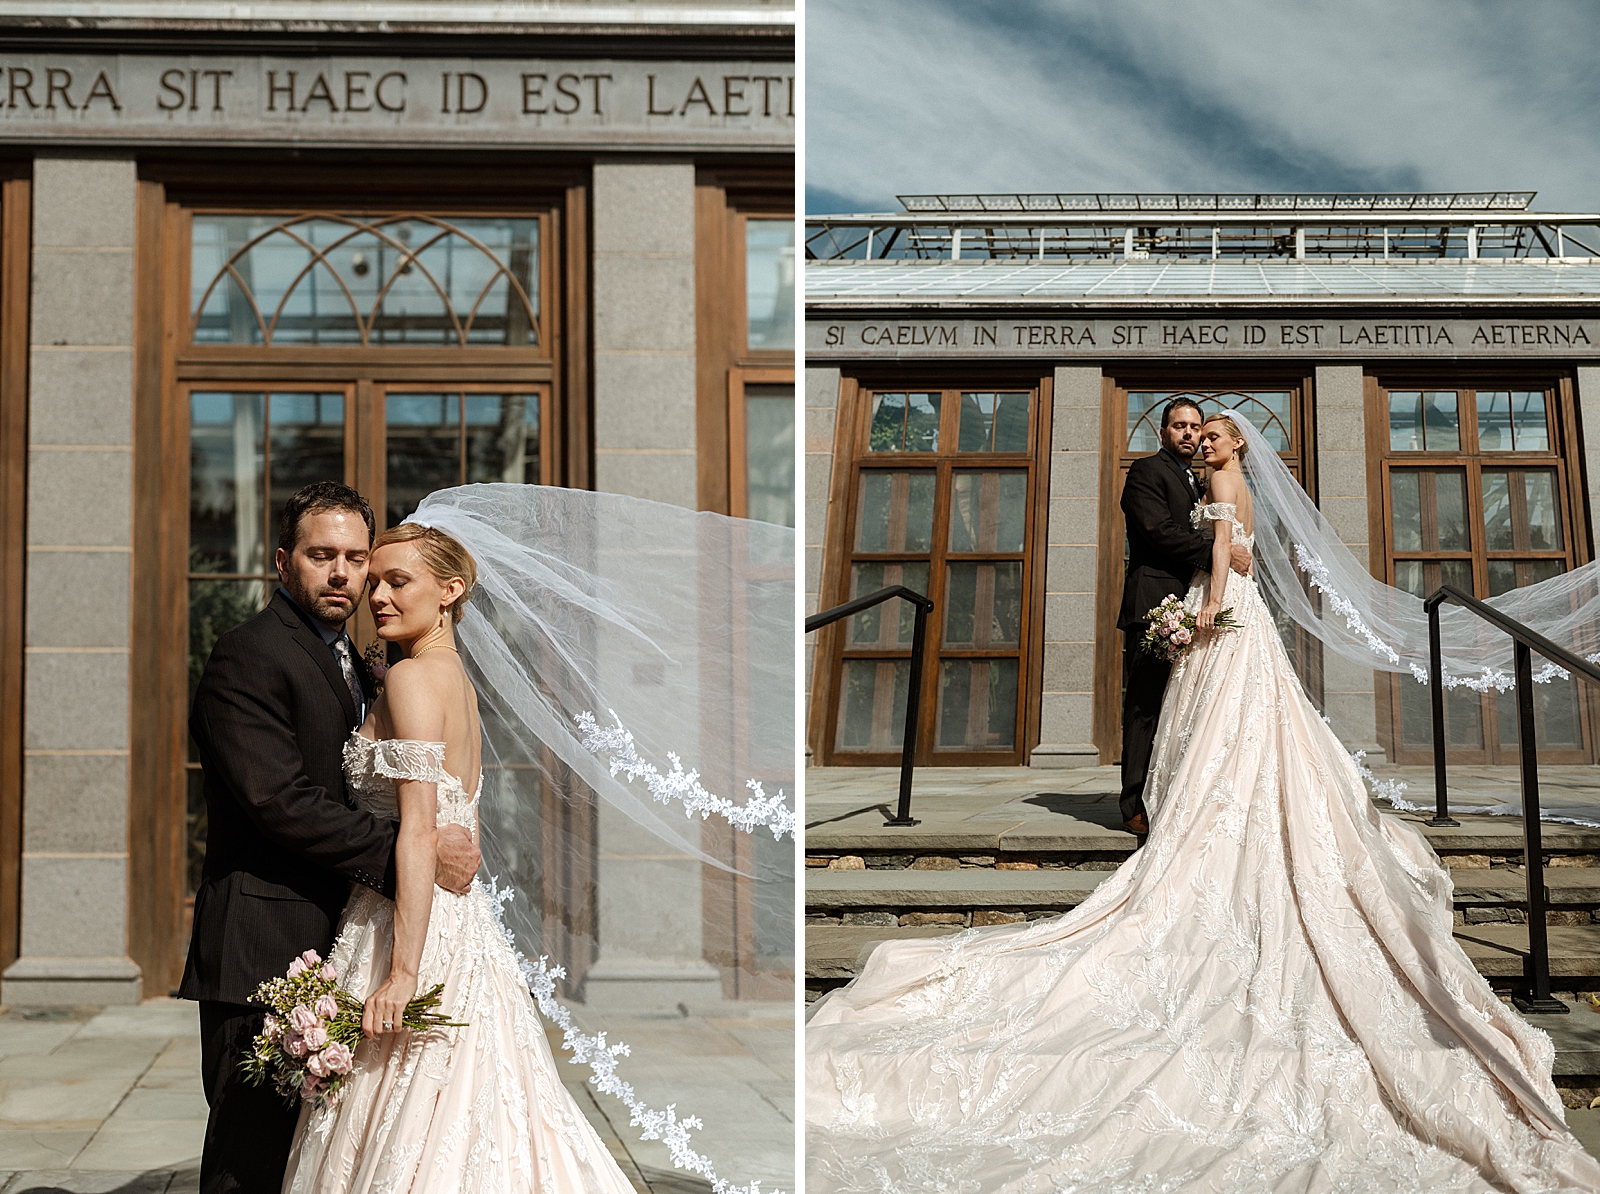 Bride and Groom holding each other in front of historic building